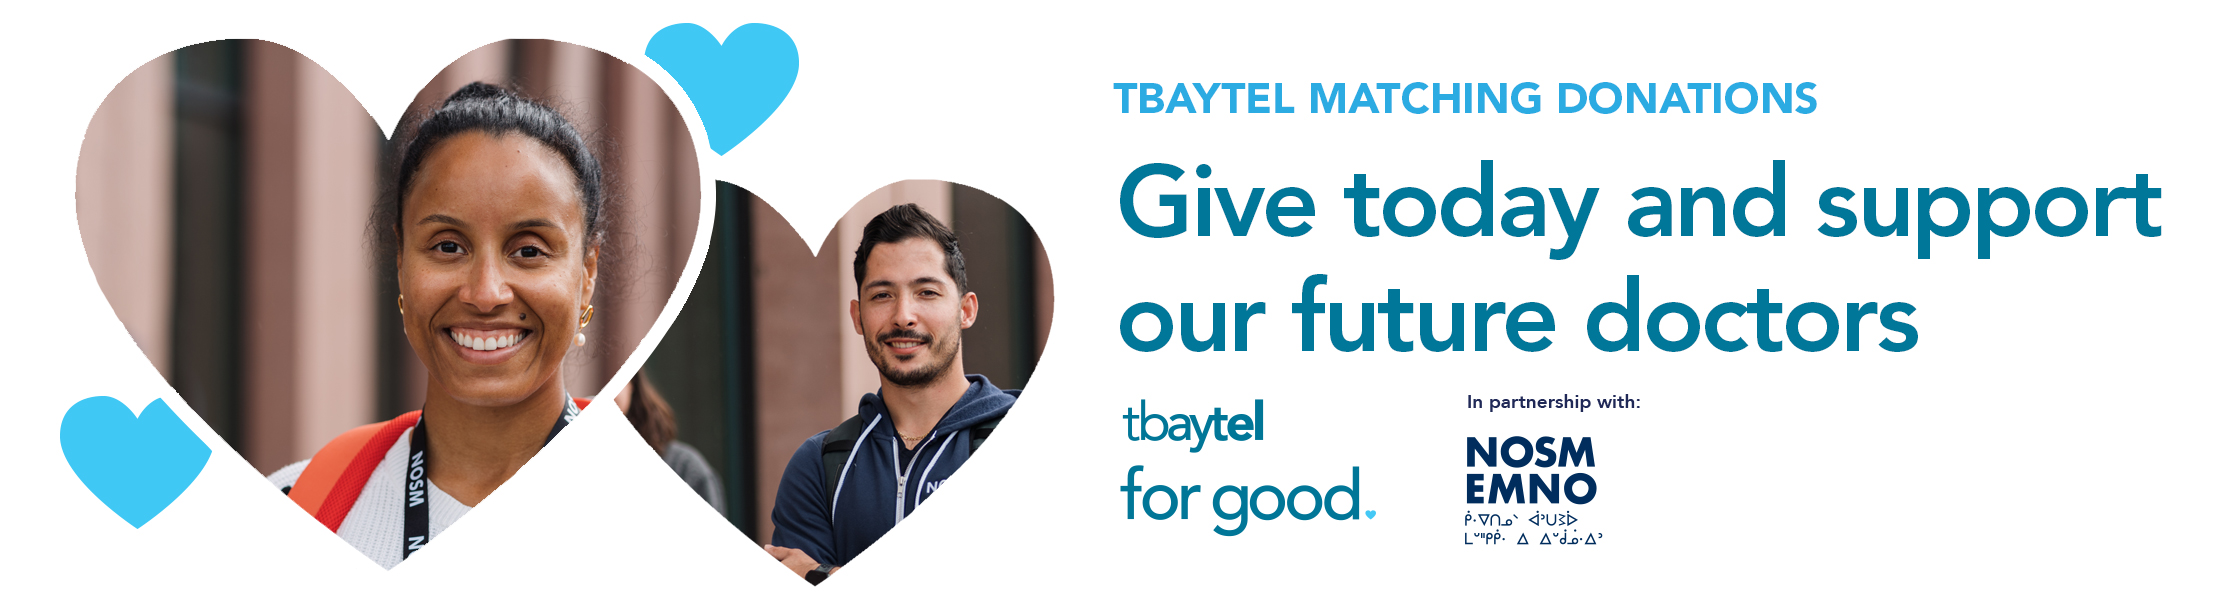 Tbaytel for Good partners with N O S M